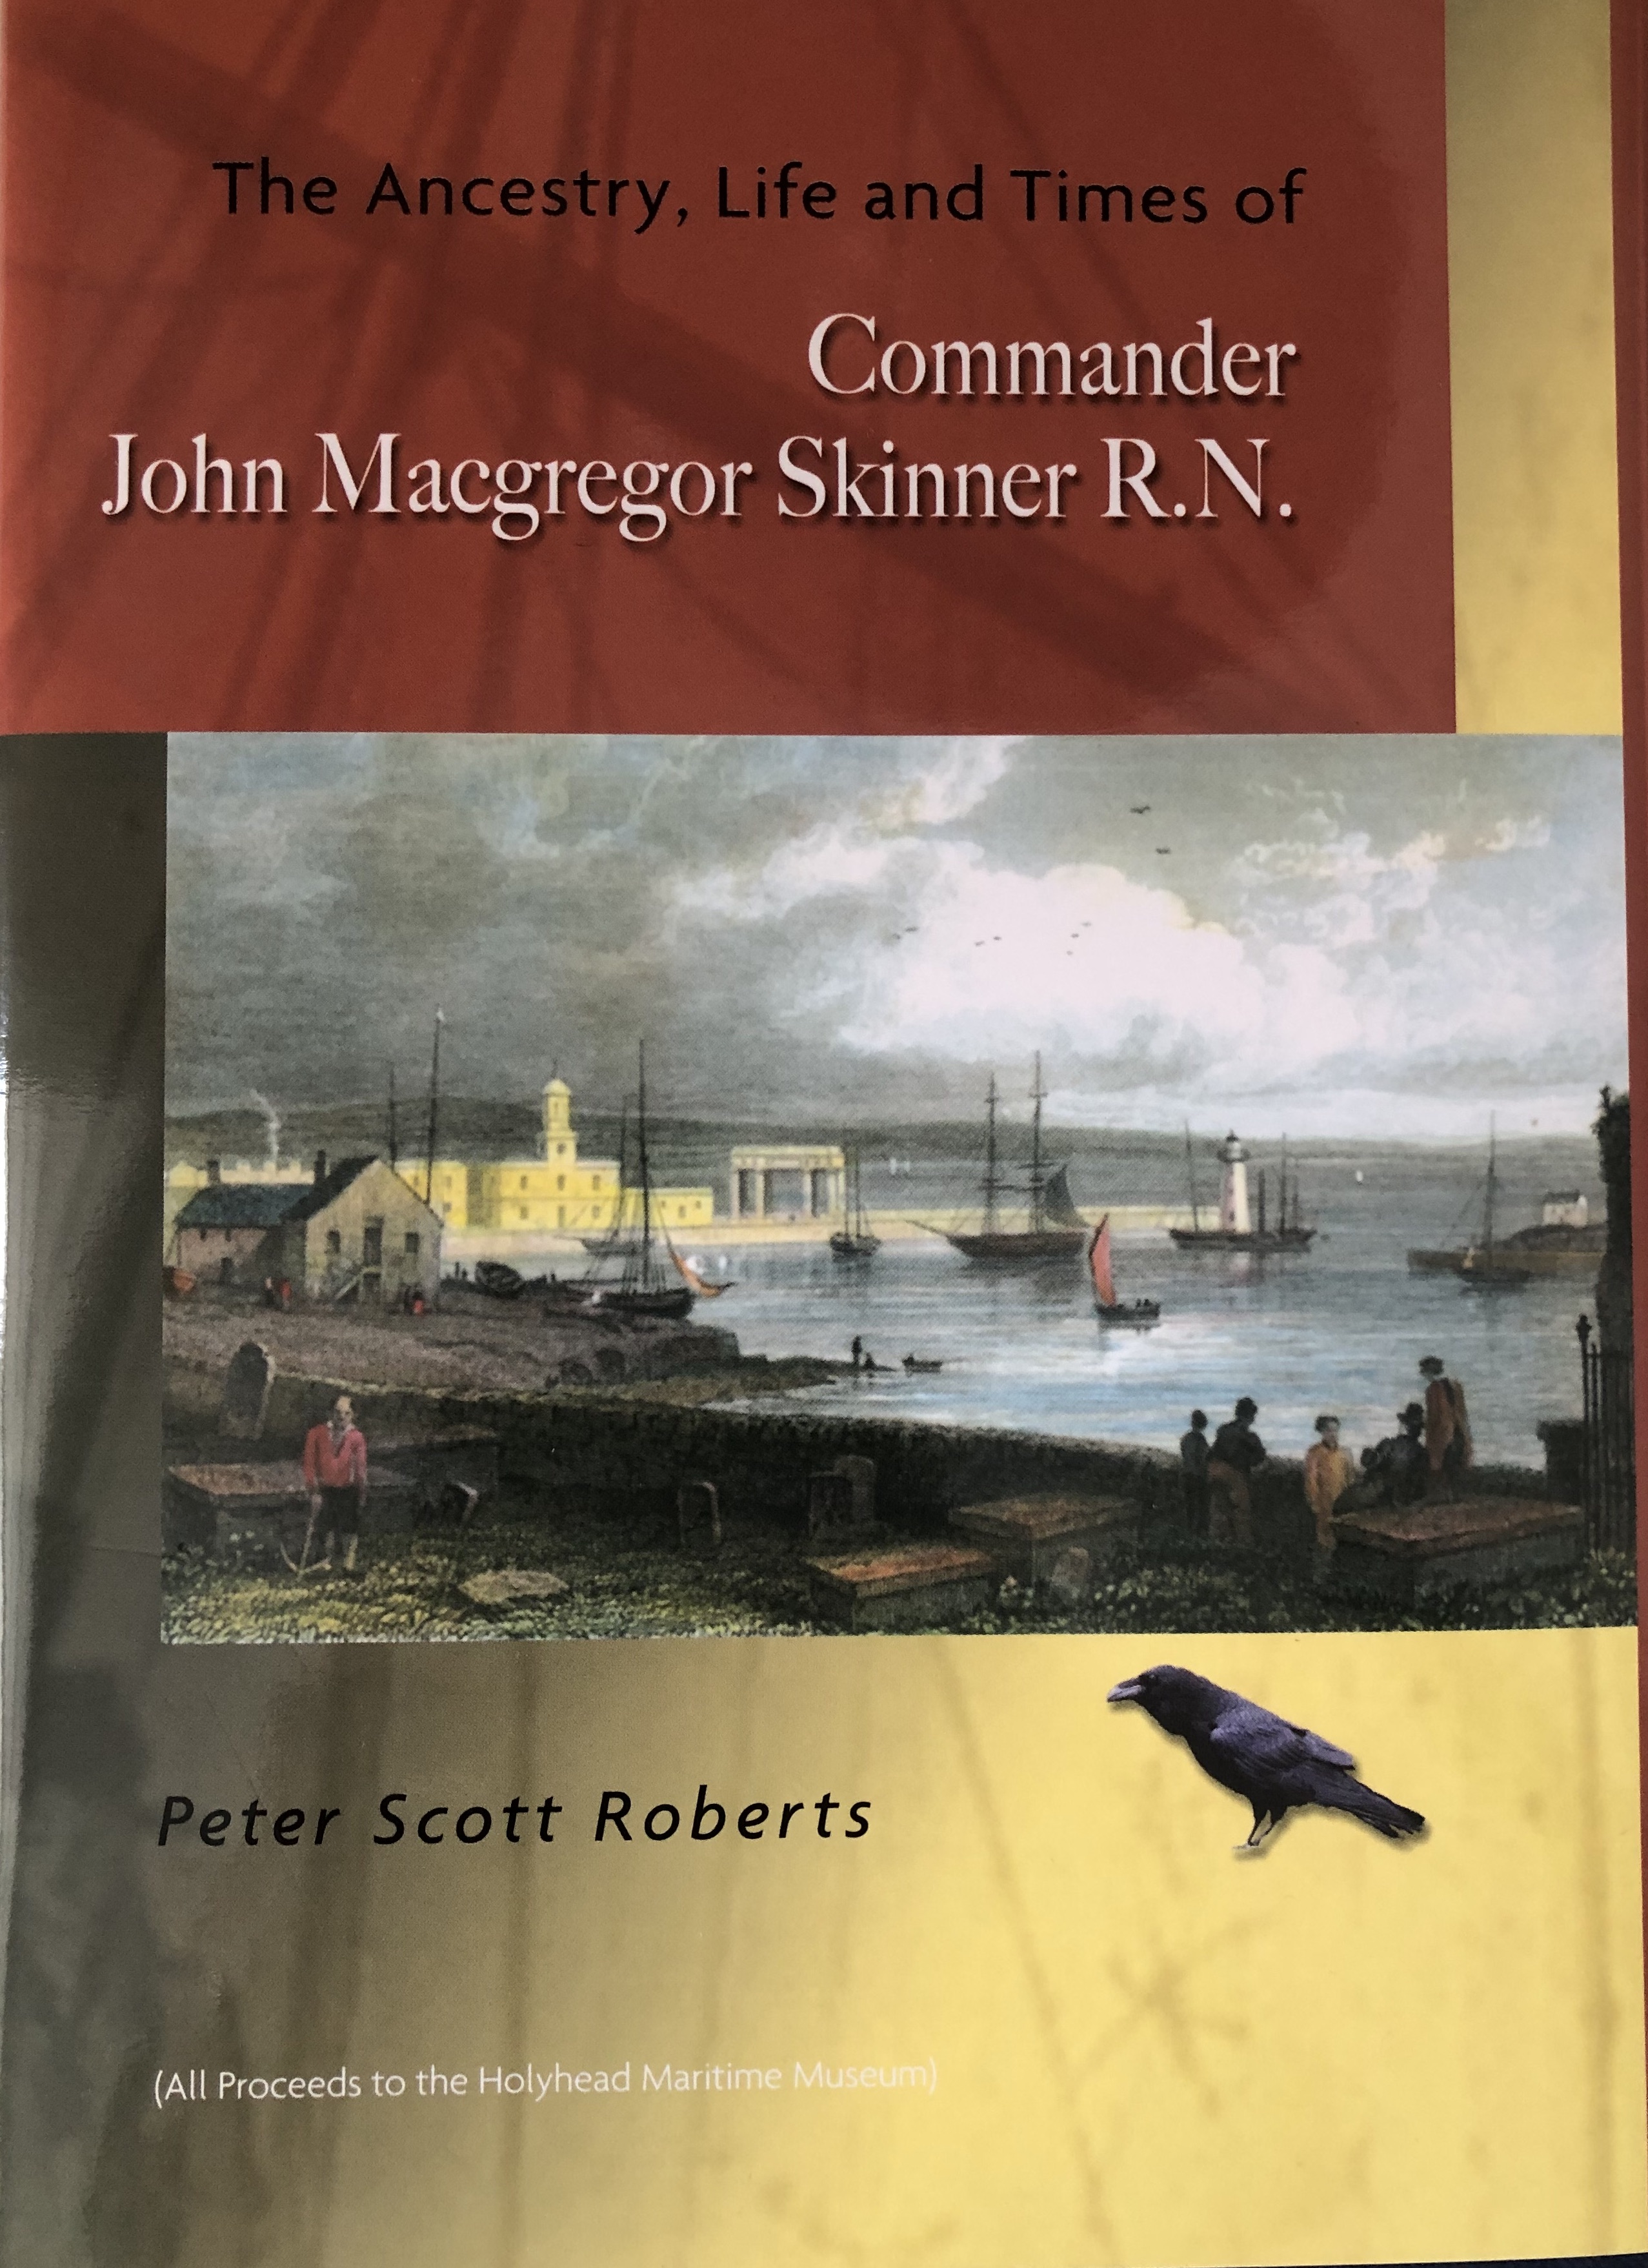 Available at the Holyhead Maritime Museum Shop